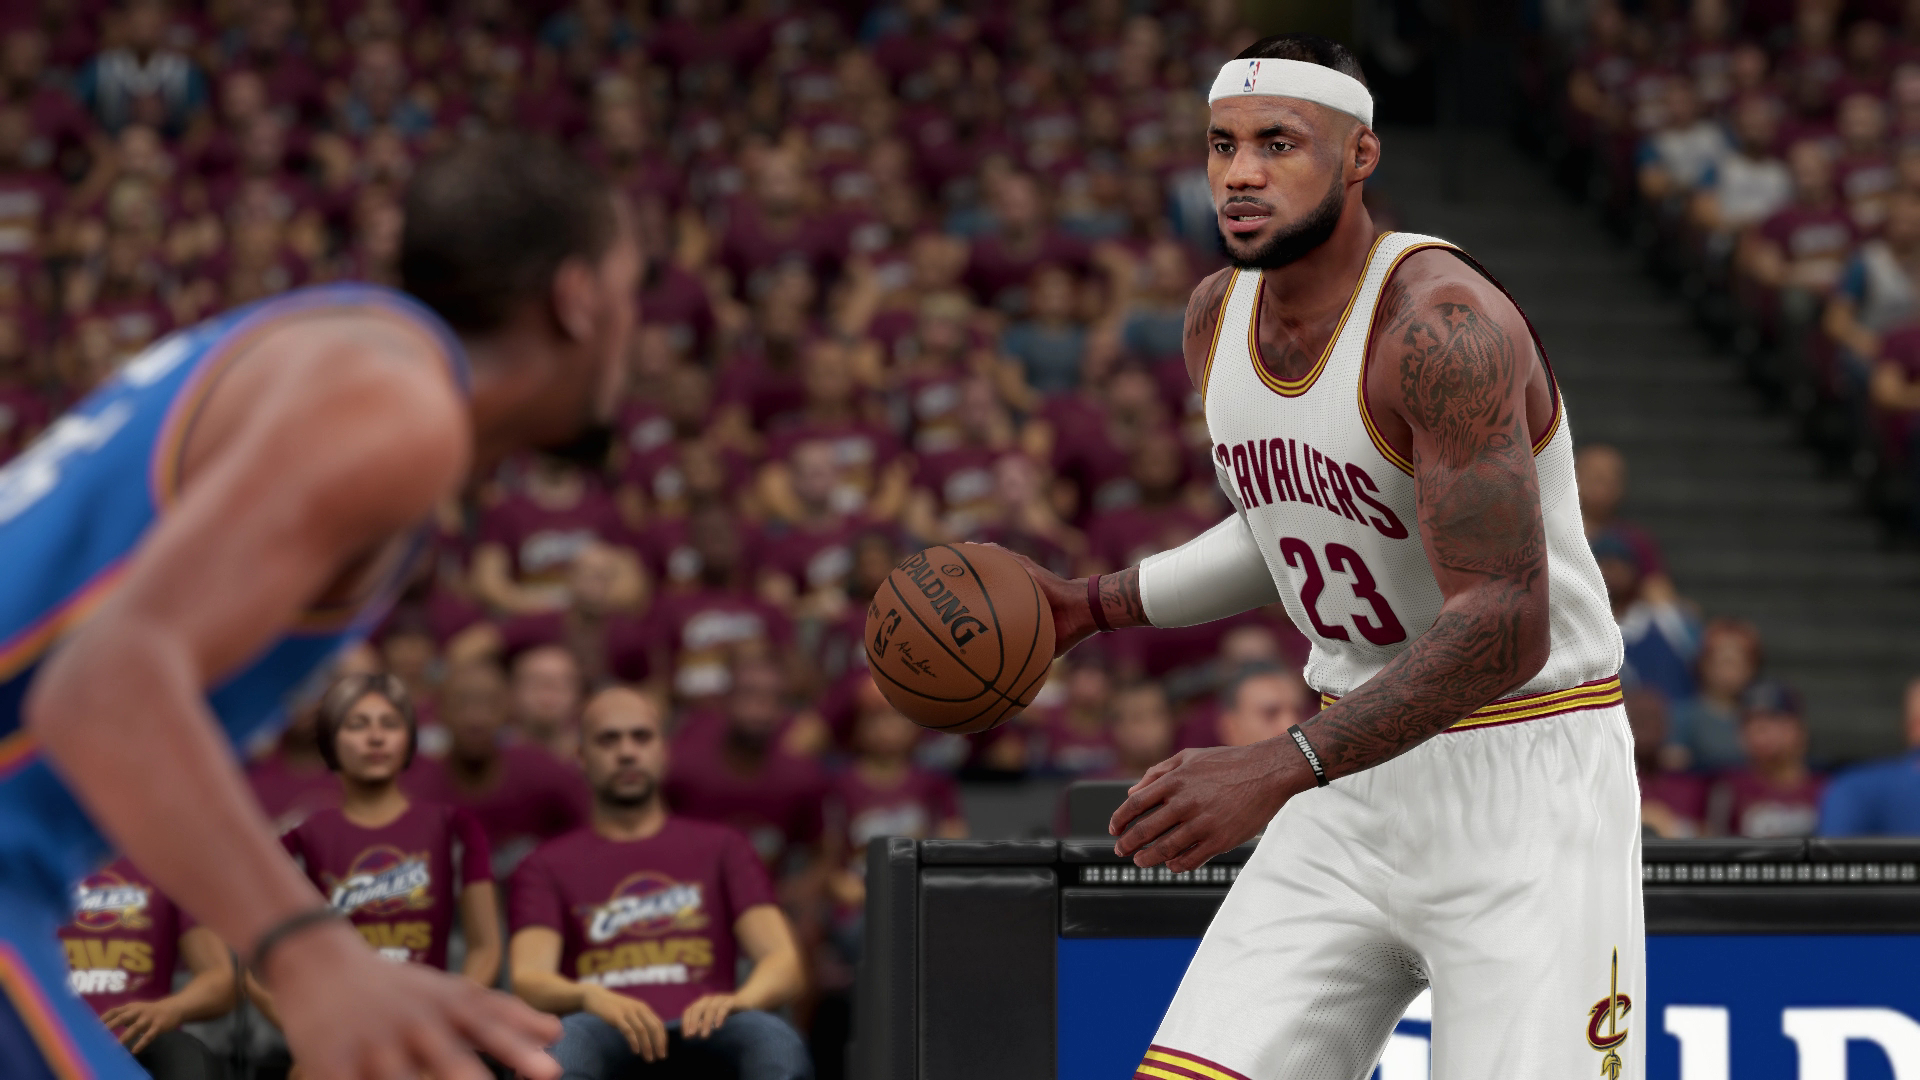 NBA 2K on X: Which player is taking home the Dunk Contest trophy